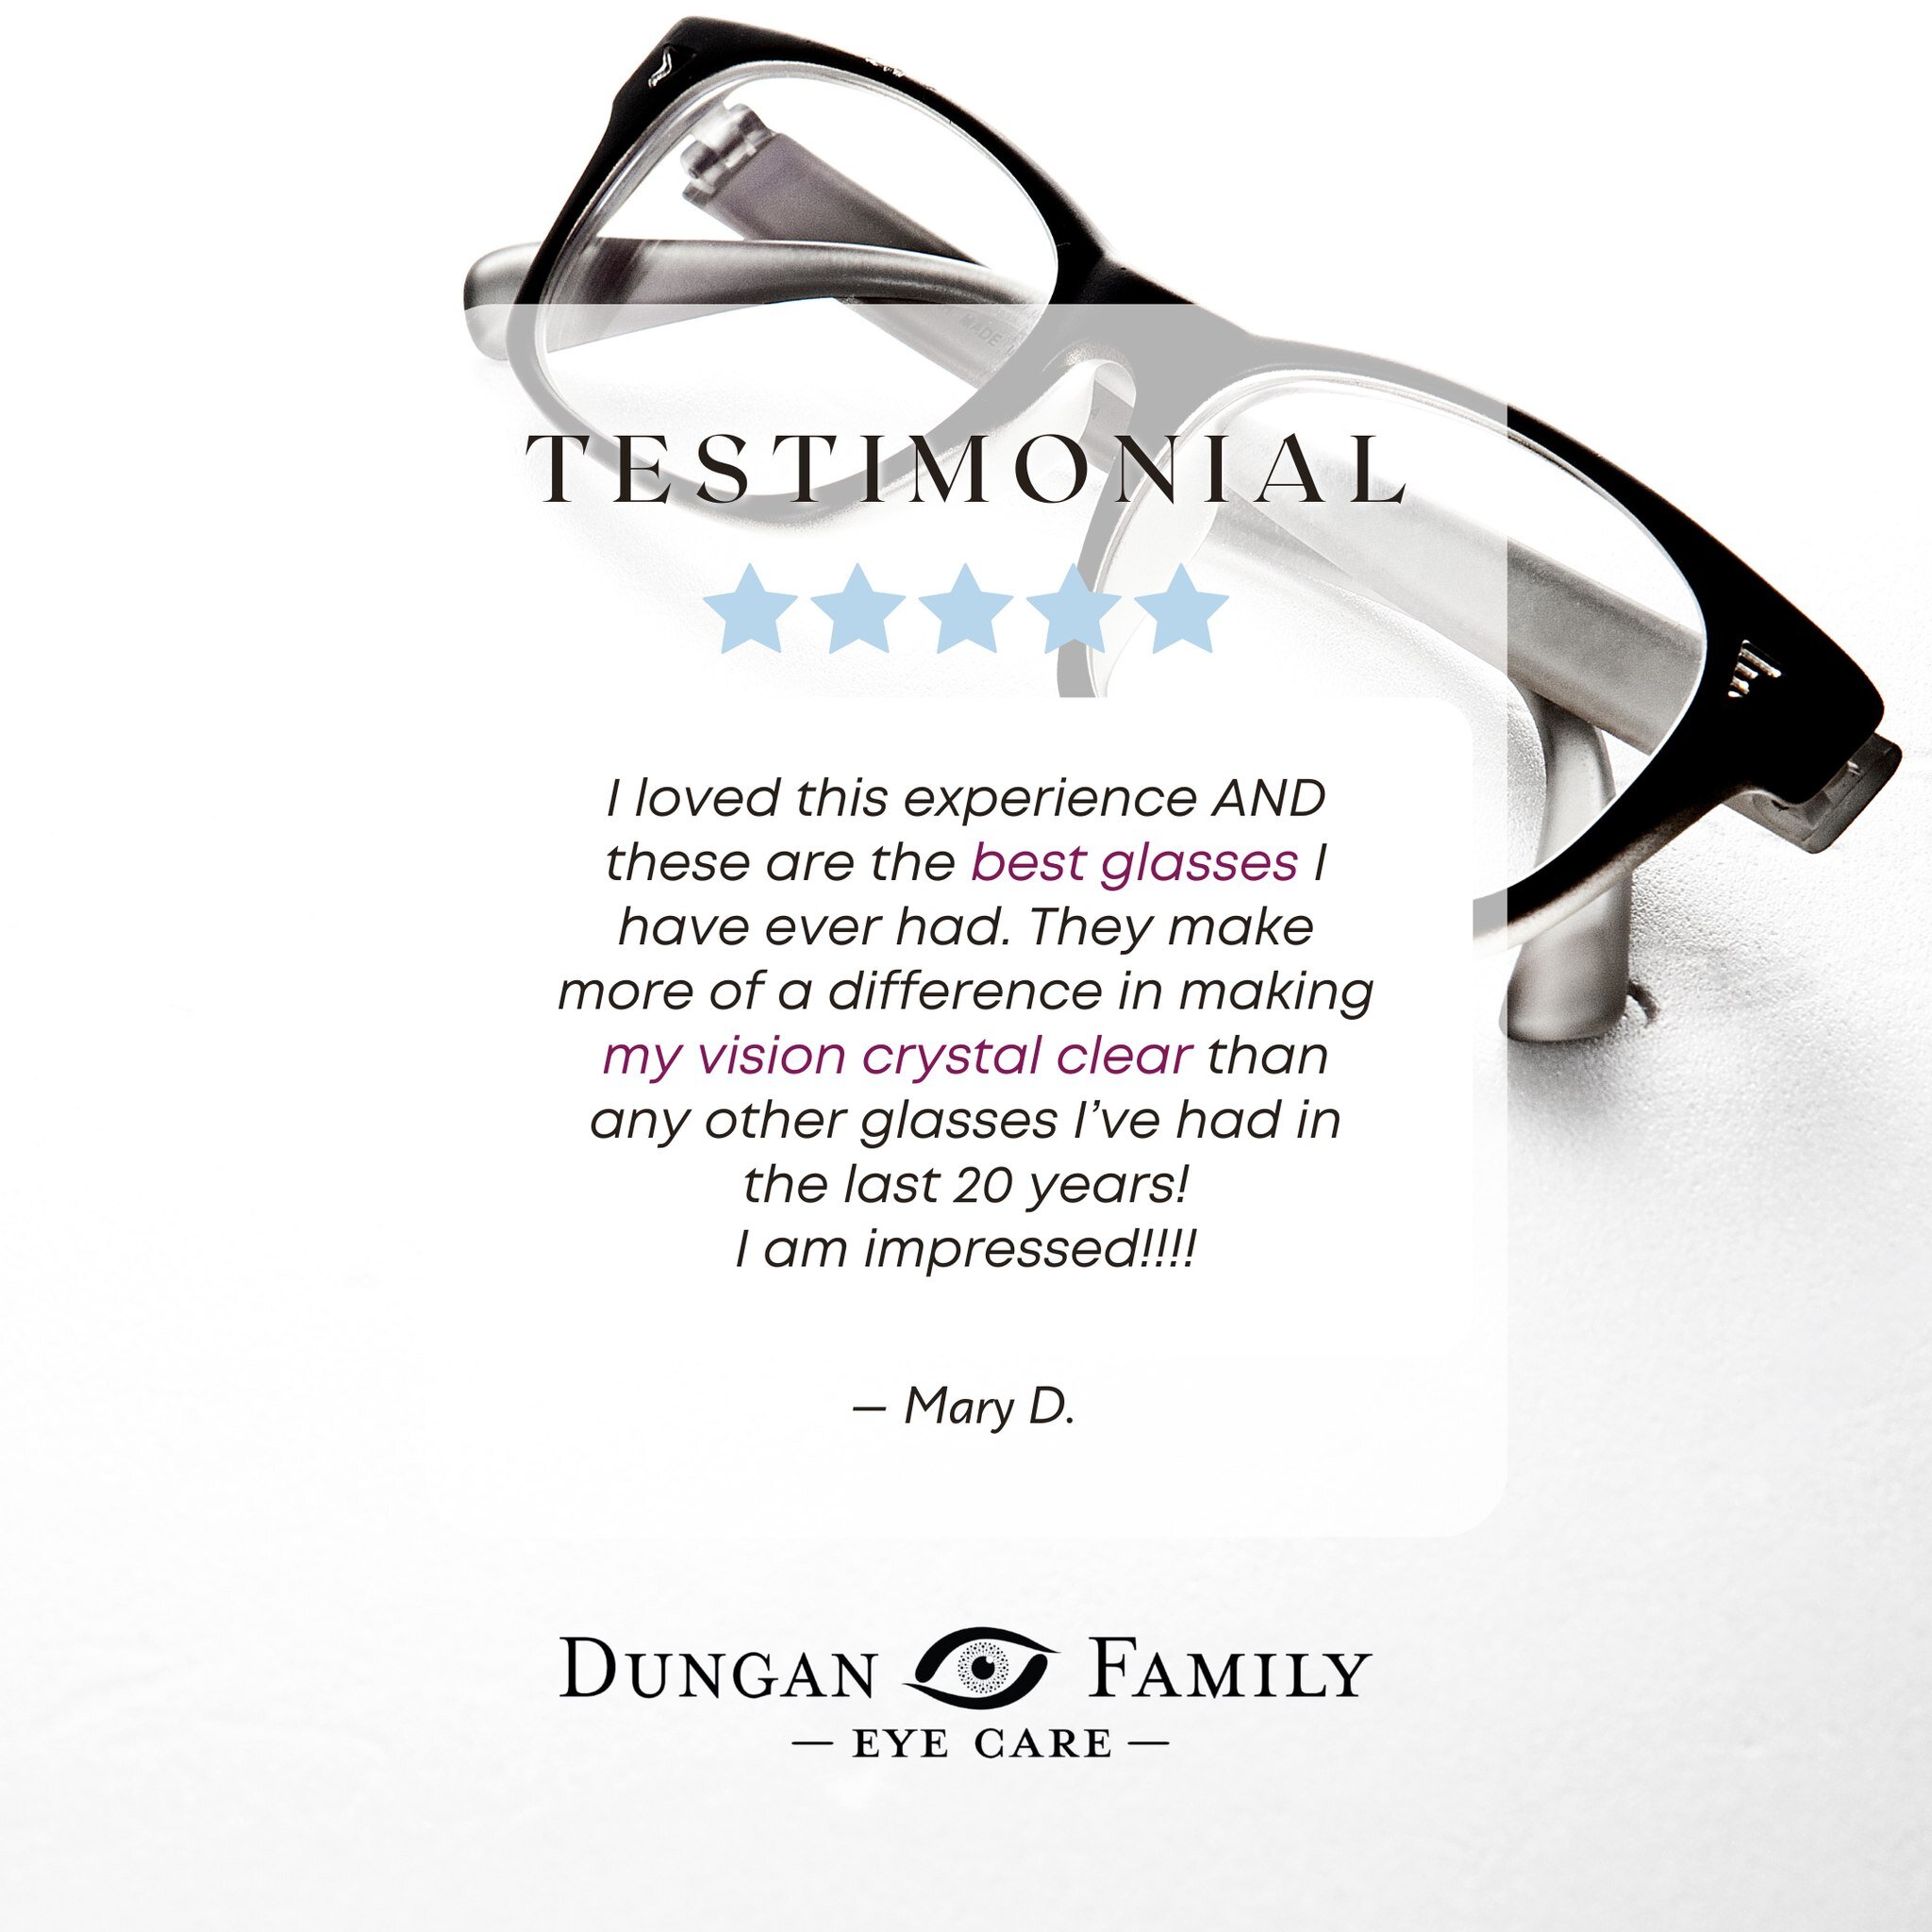 We love when our clients are enjoying all the benefits of great vision. Thanks so much, Mary, for your kind words. We&rsquo;re so happy that you&rsquo;re seeing crystal clear again.

If you&rsquo;ve been struggling with your vision or experiencing sy